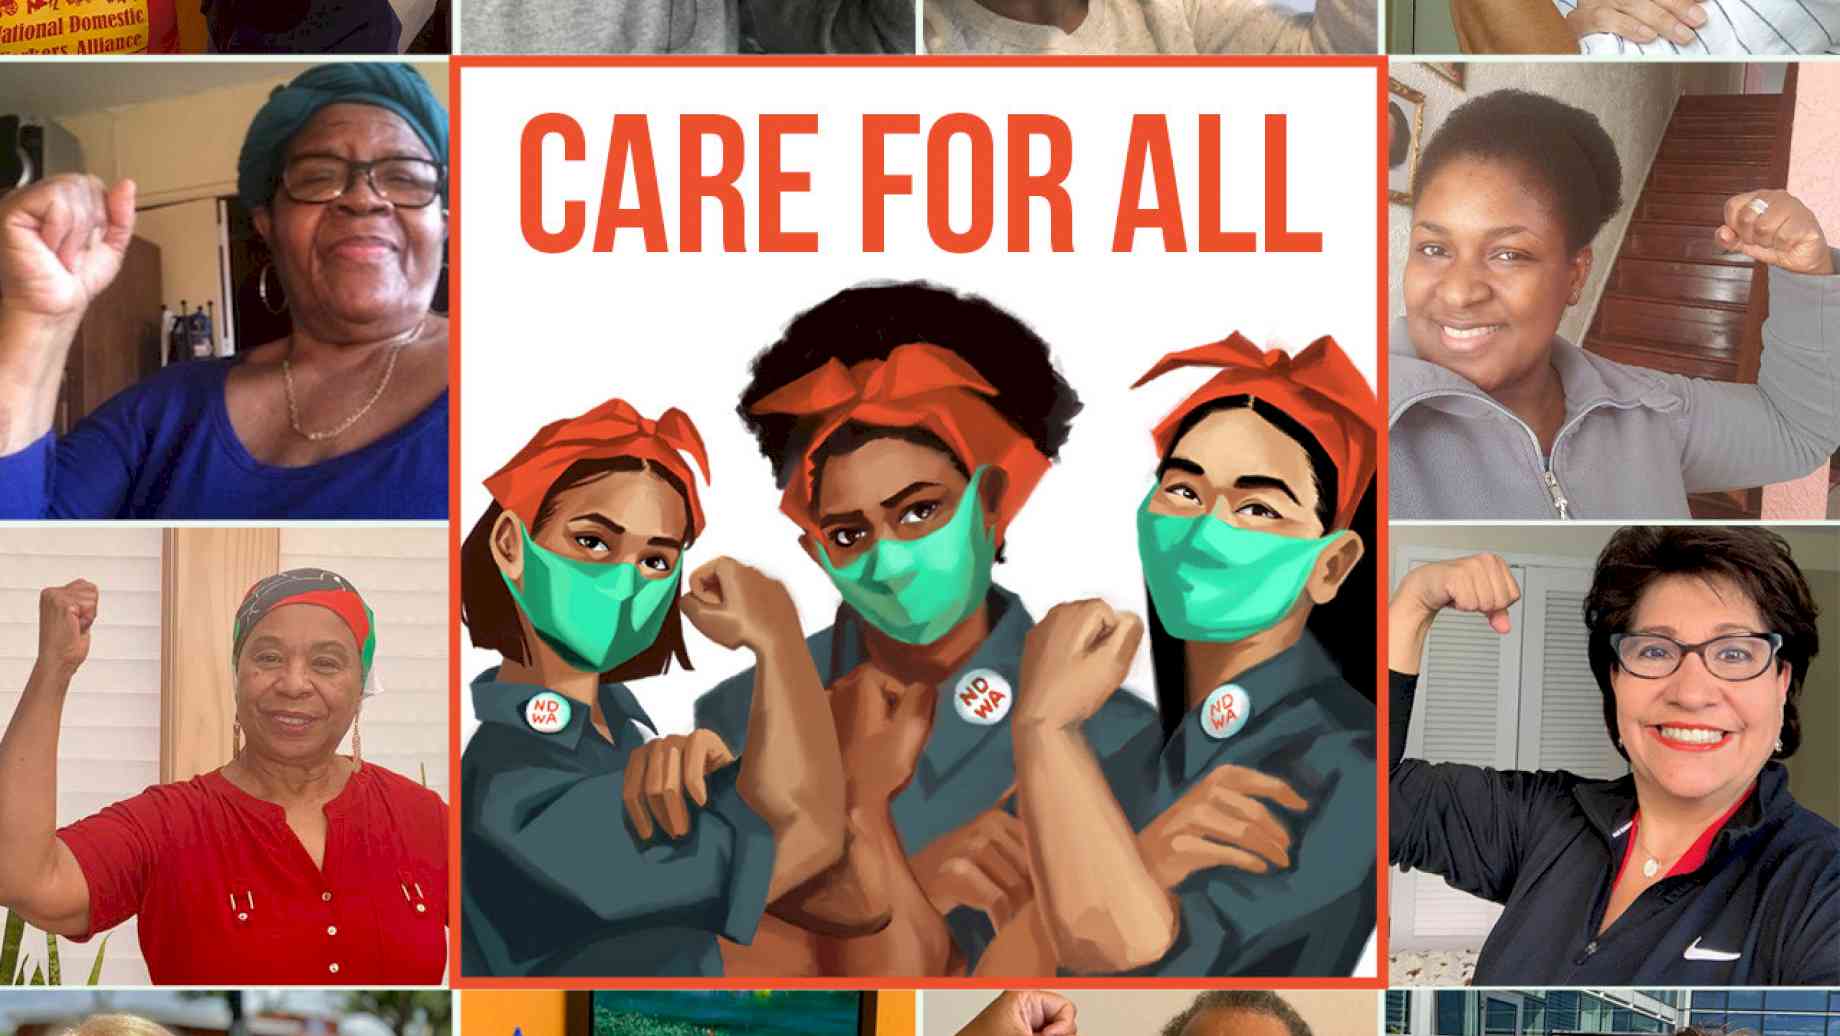 #careforall. A digital drawing of three women wearing face masks and coveralls, flexing their biceps like Rosie the Riveter, surrounded by photographs of women of color doing the same. Credit: The National Domestic Workers Alliance